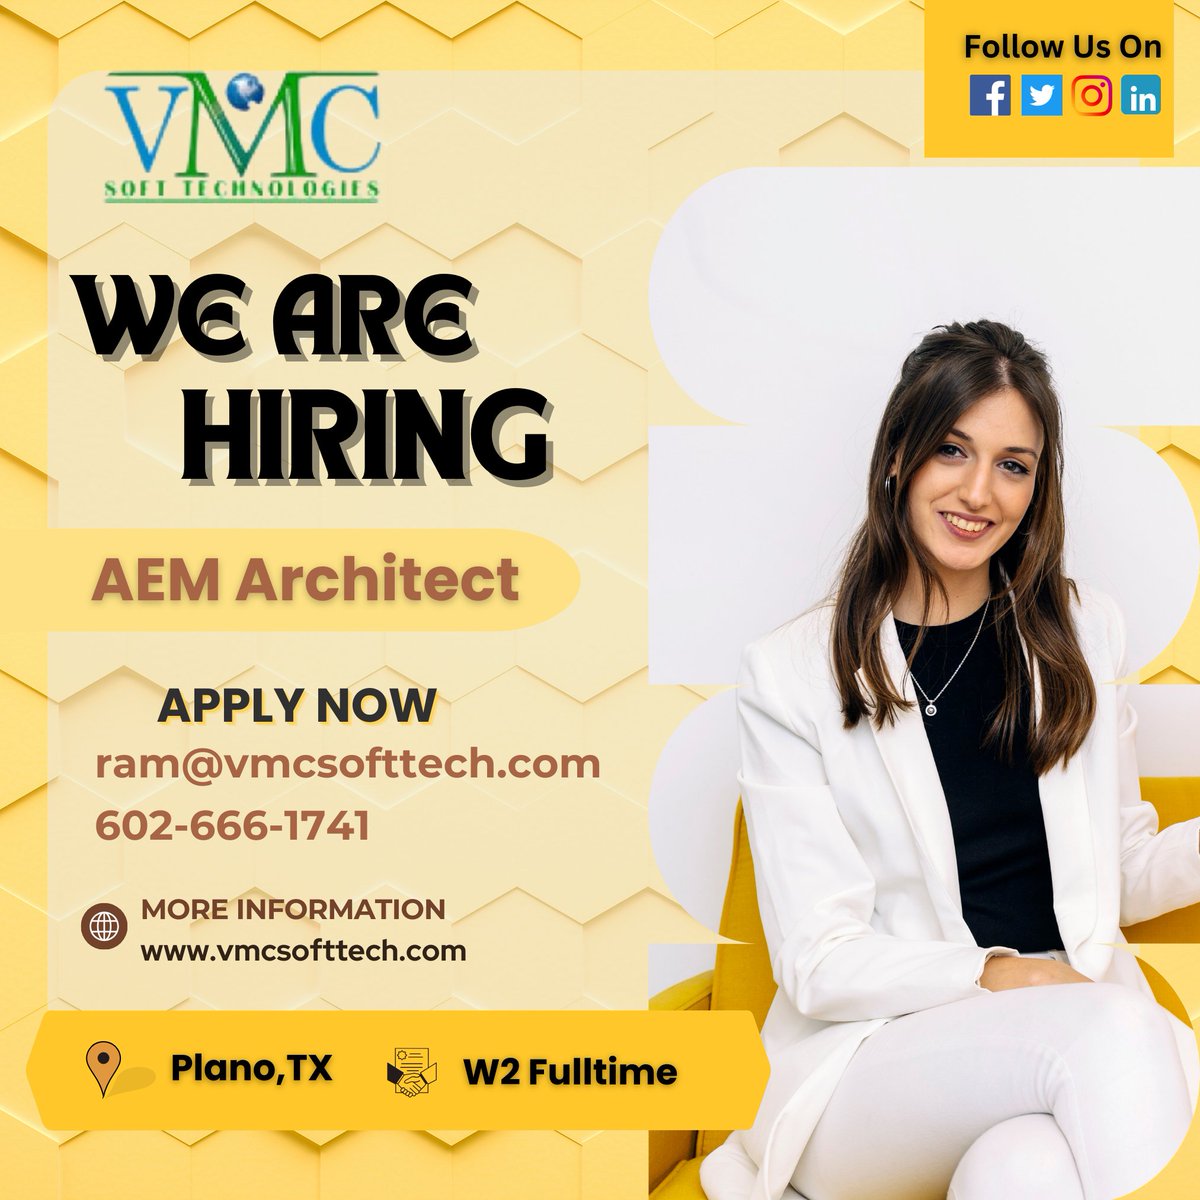 VMC Soft Technologies looking for a AEM Architect in Location Plano, TX Job Title: AEM Architect Locations: Plano, TX Contract: W2 Full-Time For more details: ram@vmcsofttech.com/ 602-666-1741 ...... Apply Now: vmcsofttech.com/careers/ #AEMDeveloper#AdobeExperienceManager